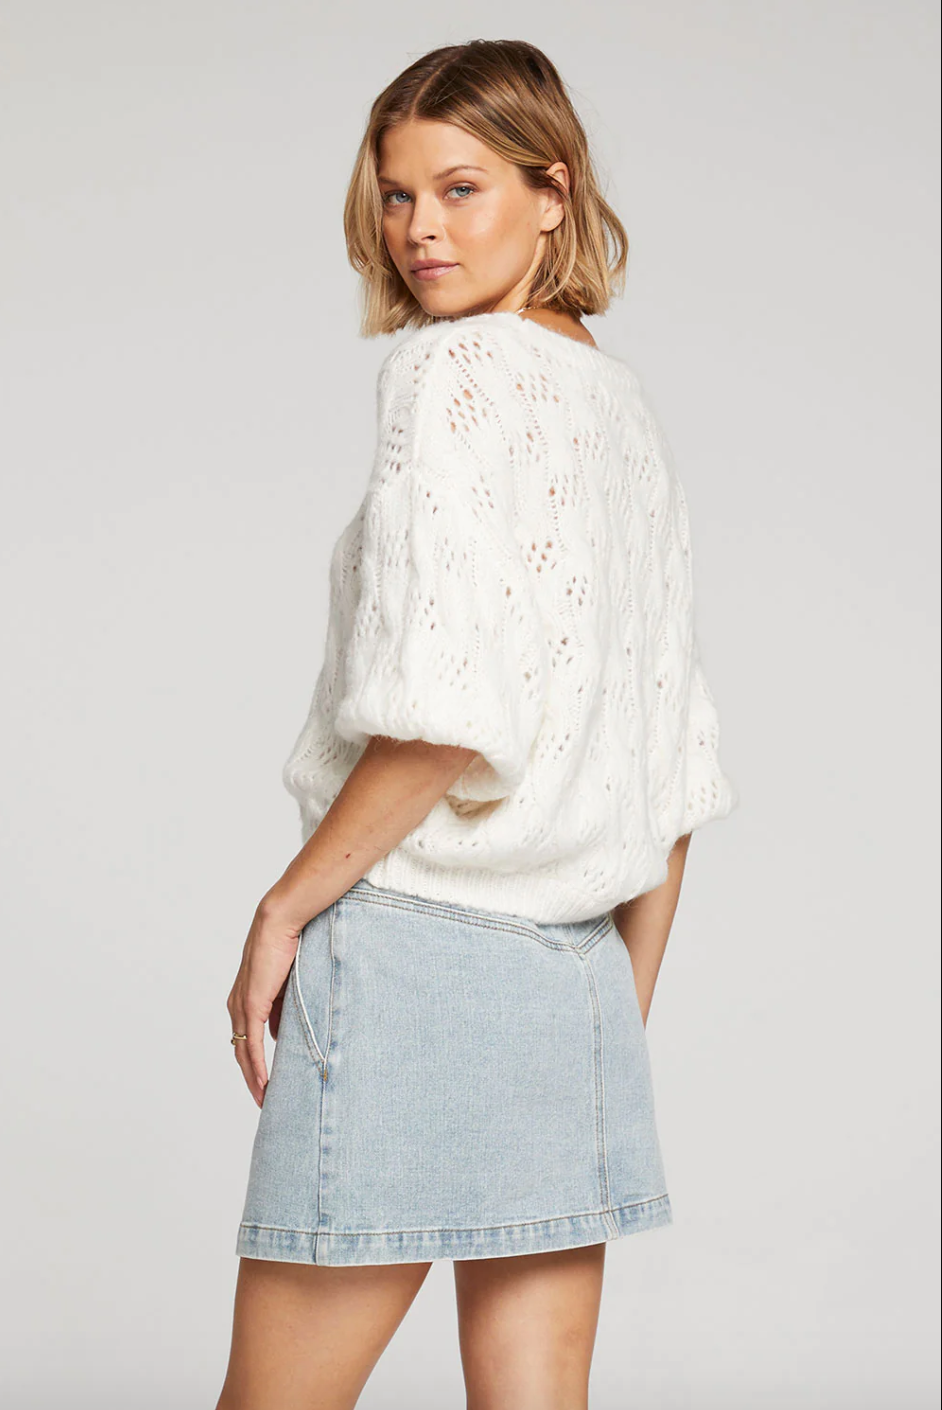 Saltwater Luxe - Frank Sweater - Council Studio